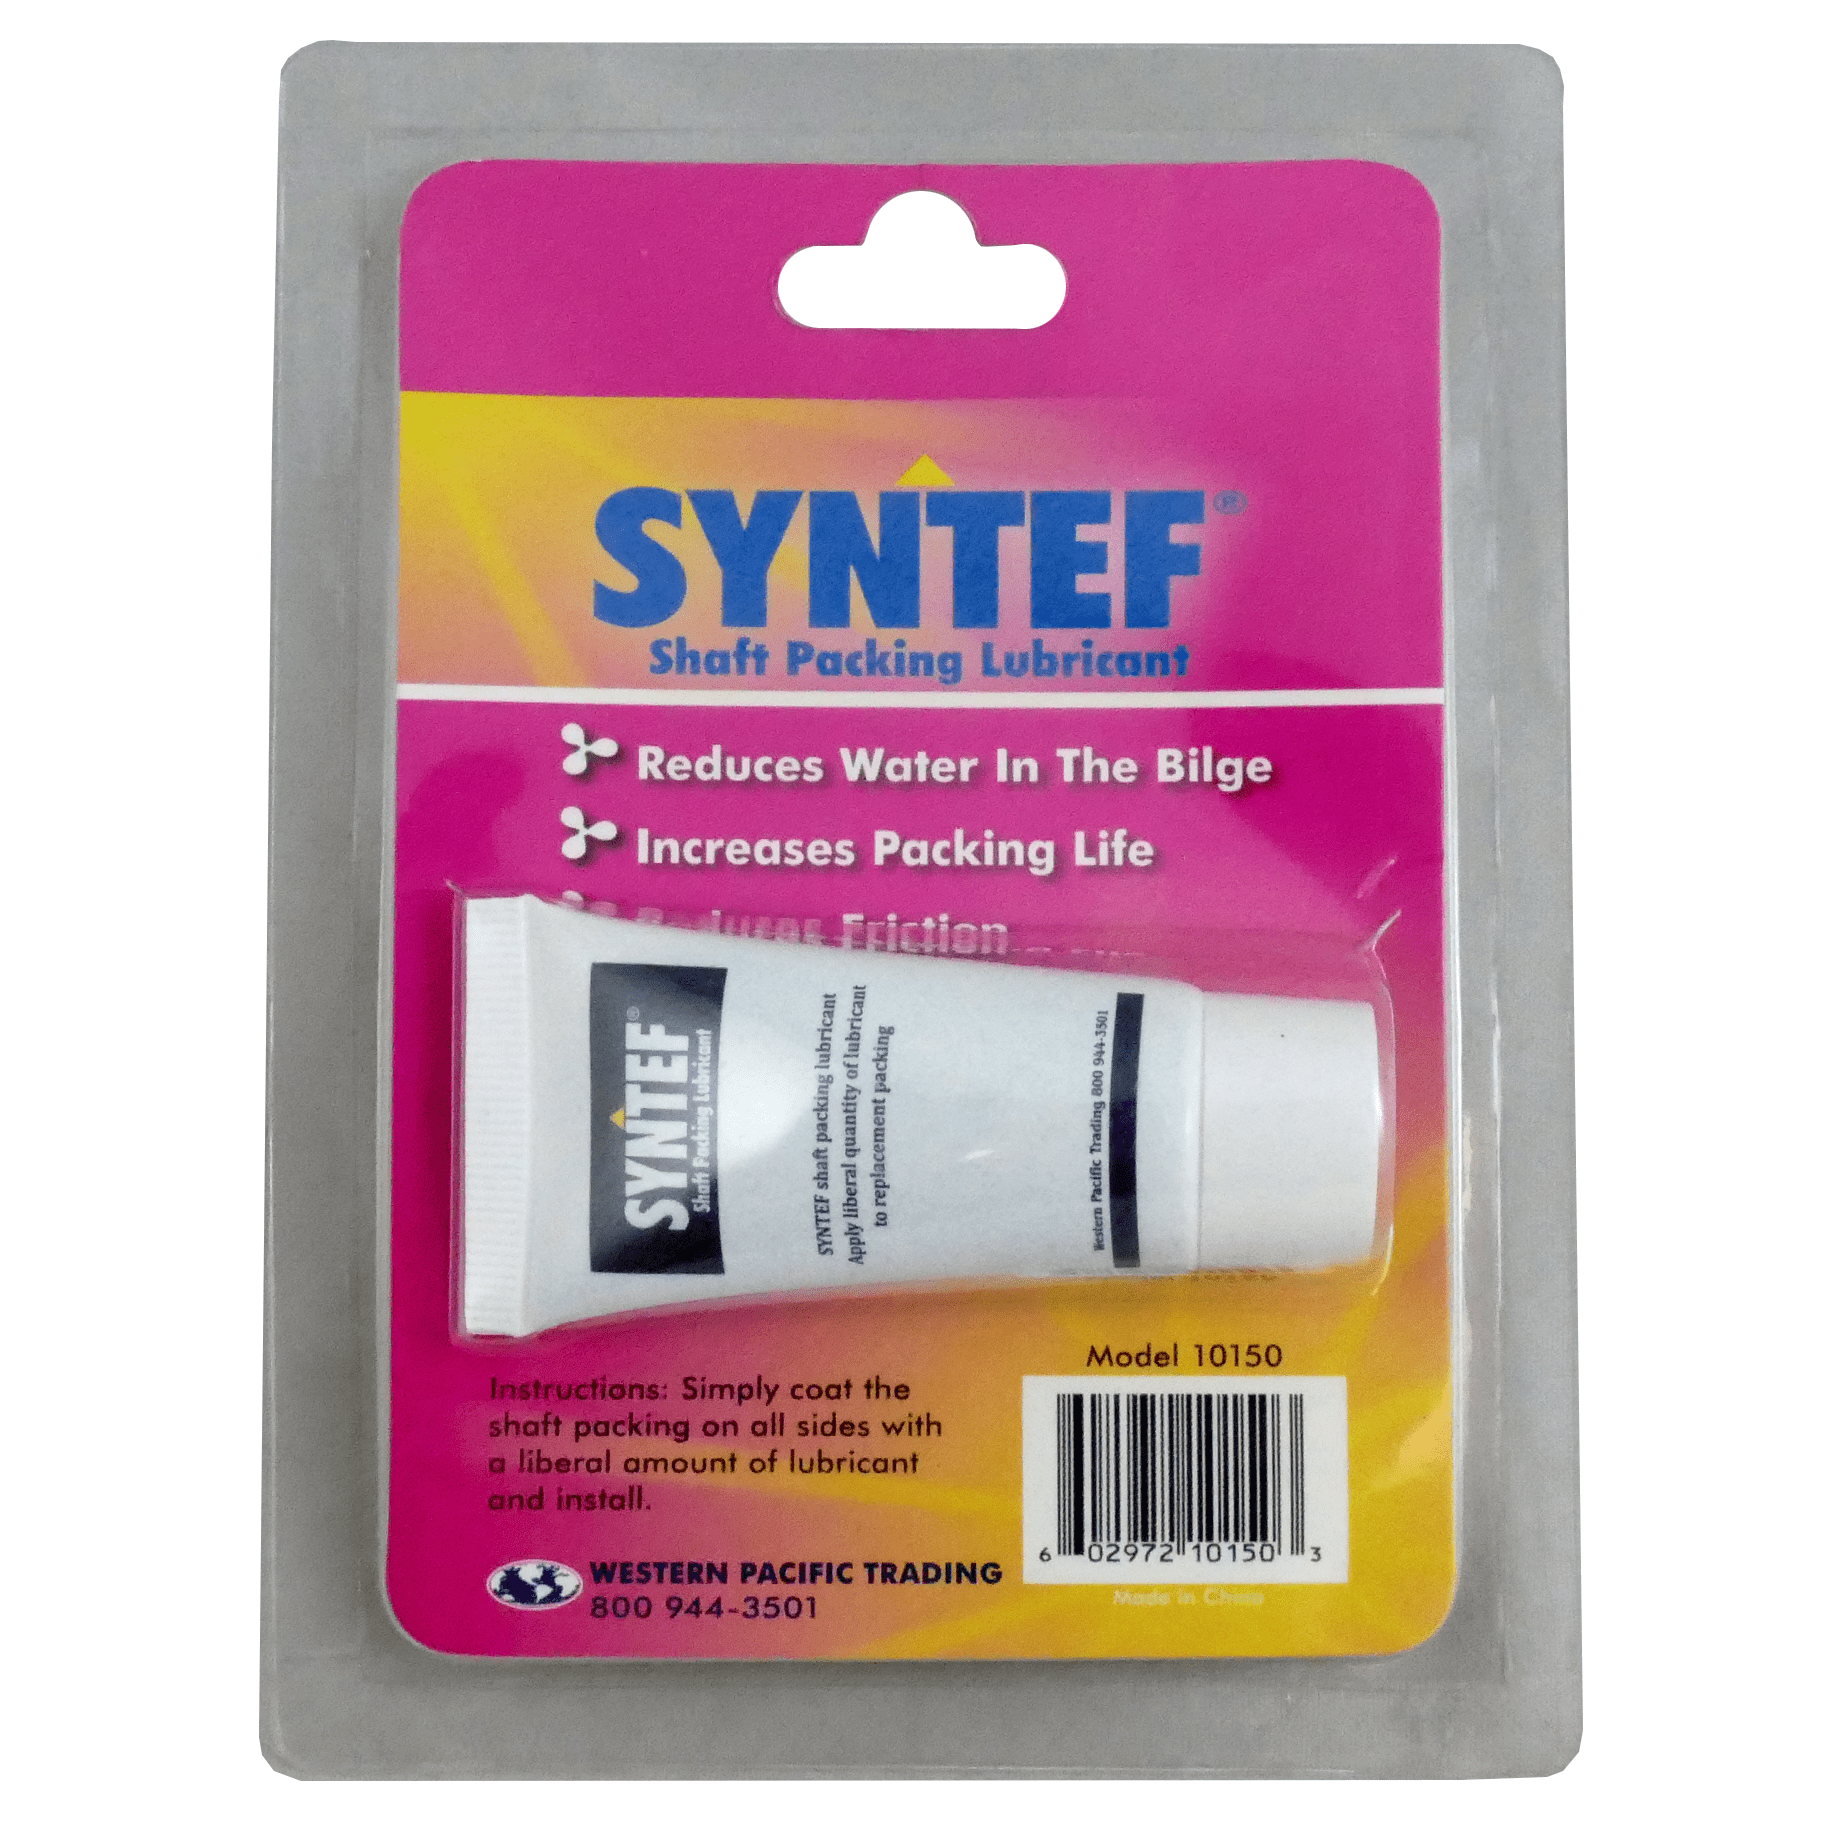 in package of Western Pacific Trading Syntef Shaft Lubricant